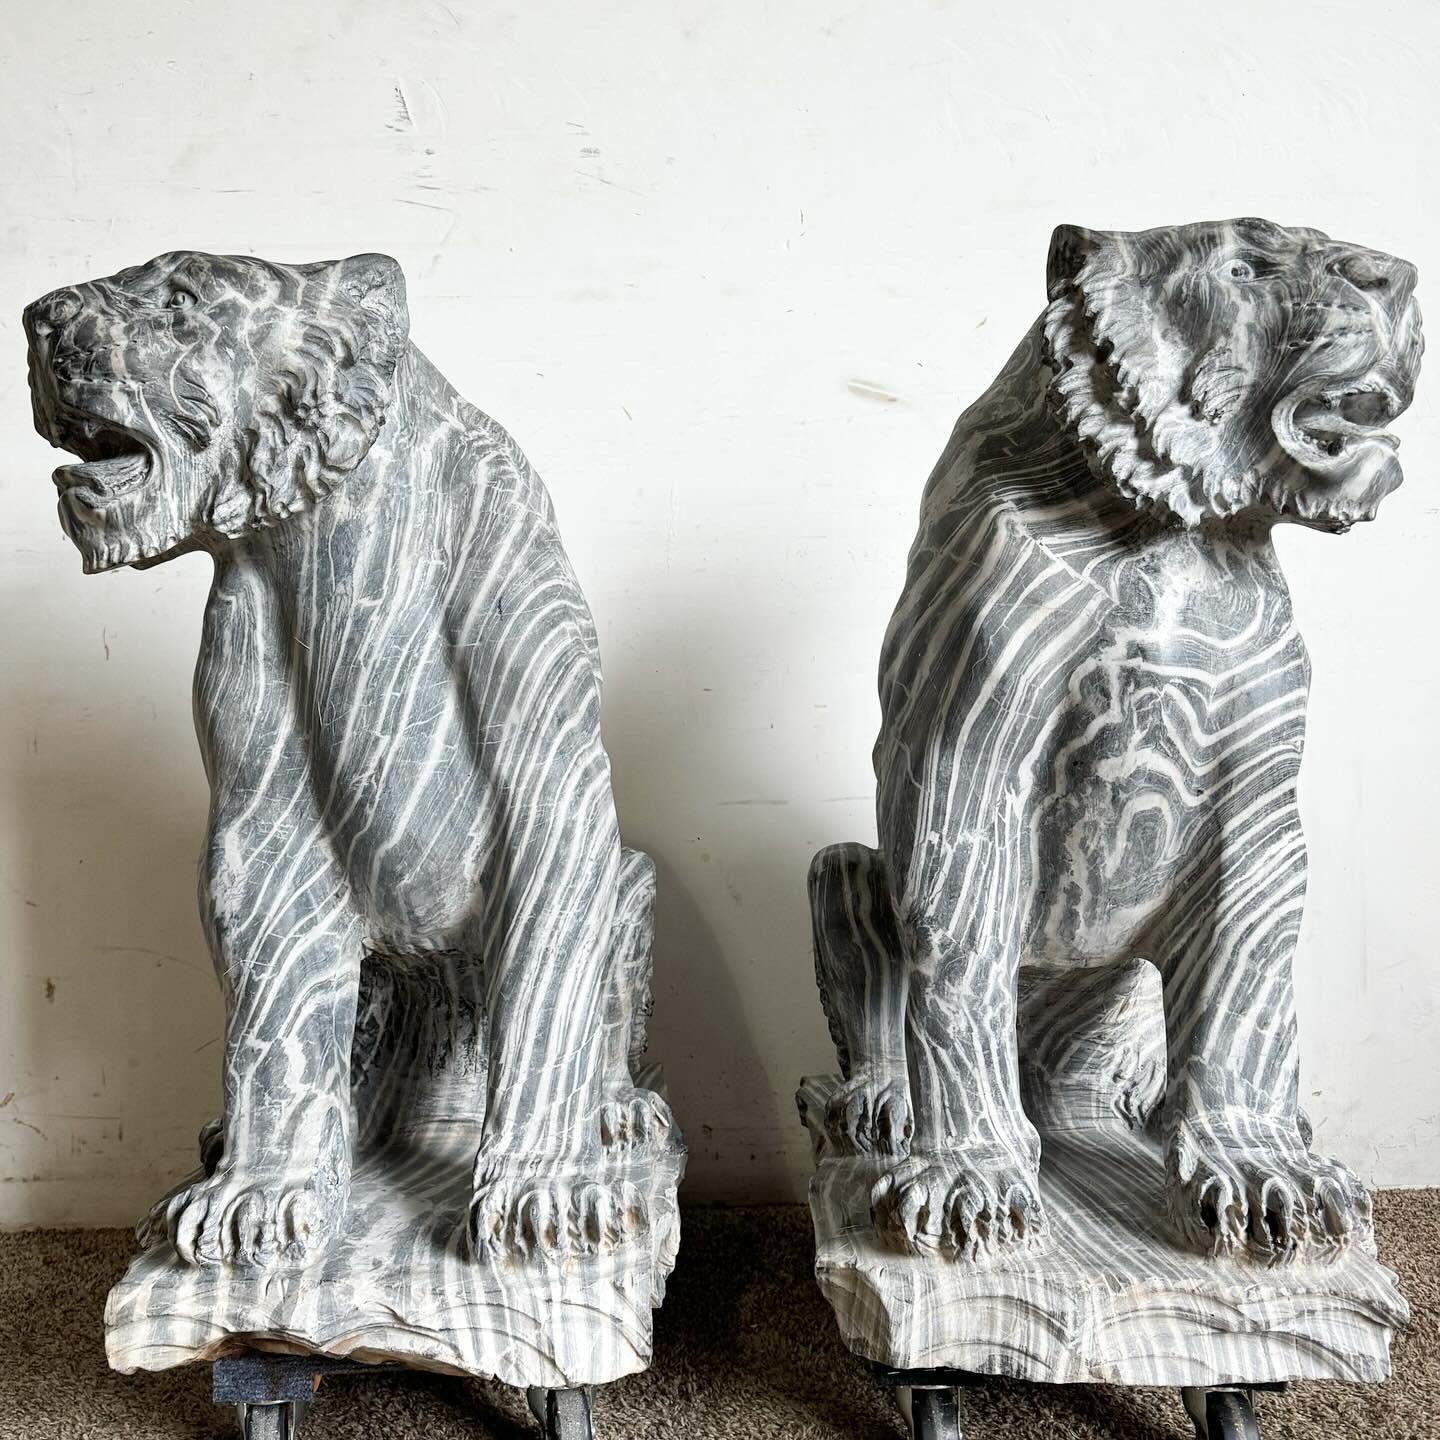 Behold the majesty and artistry of these Hand Carved Black Marble Tiger Statues, a truly exceptional pair. Each statue is masterfully crafted from solid black marble, resulting in a weighty and substantial feel. The level of detail in the carving is